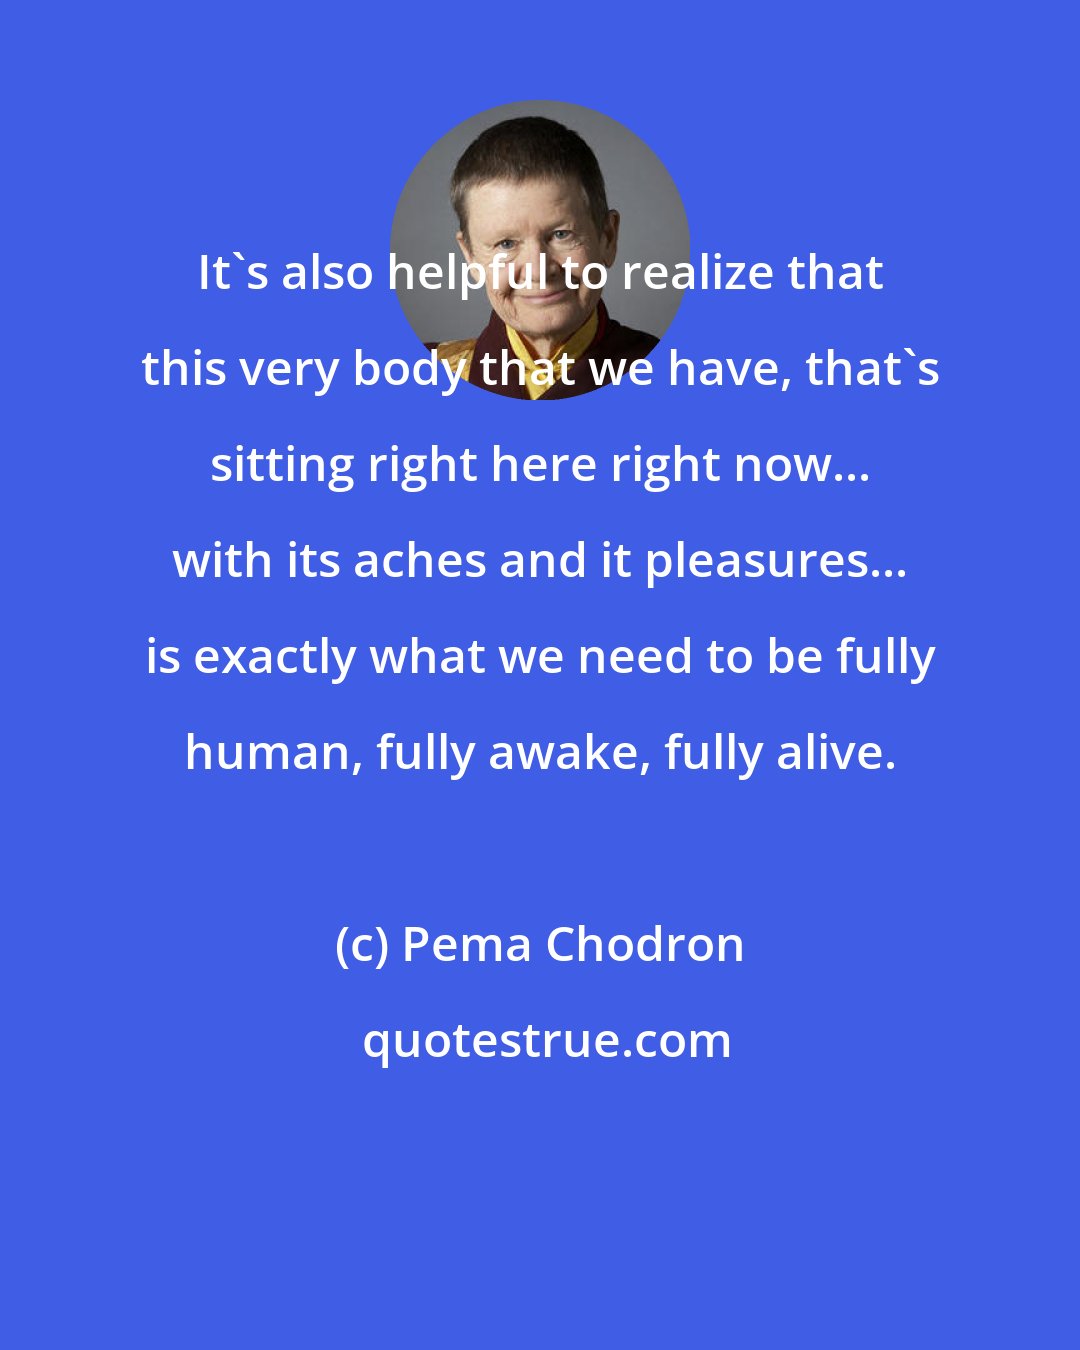 Pema Chodron: It's also helpful to realize that this very body that we have, that's sitting right here right now... with its aches and it pleasures... is exactly what we need to be fully human, fully awake, fully alive.